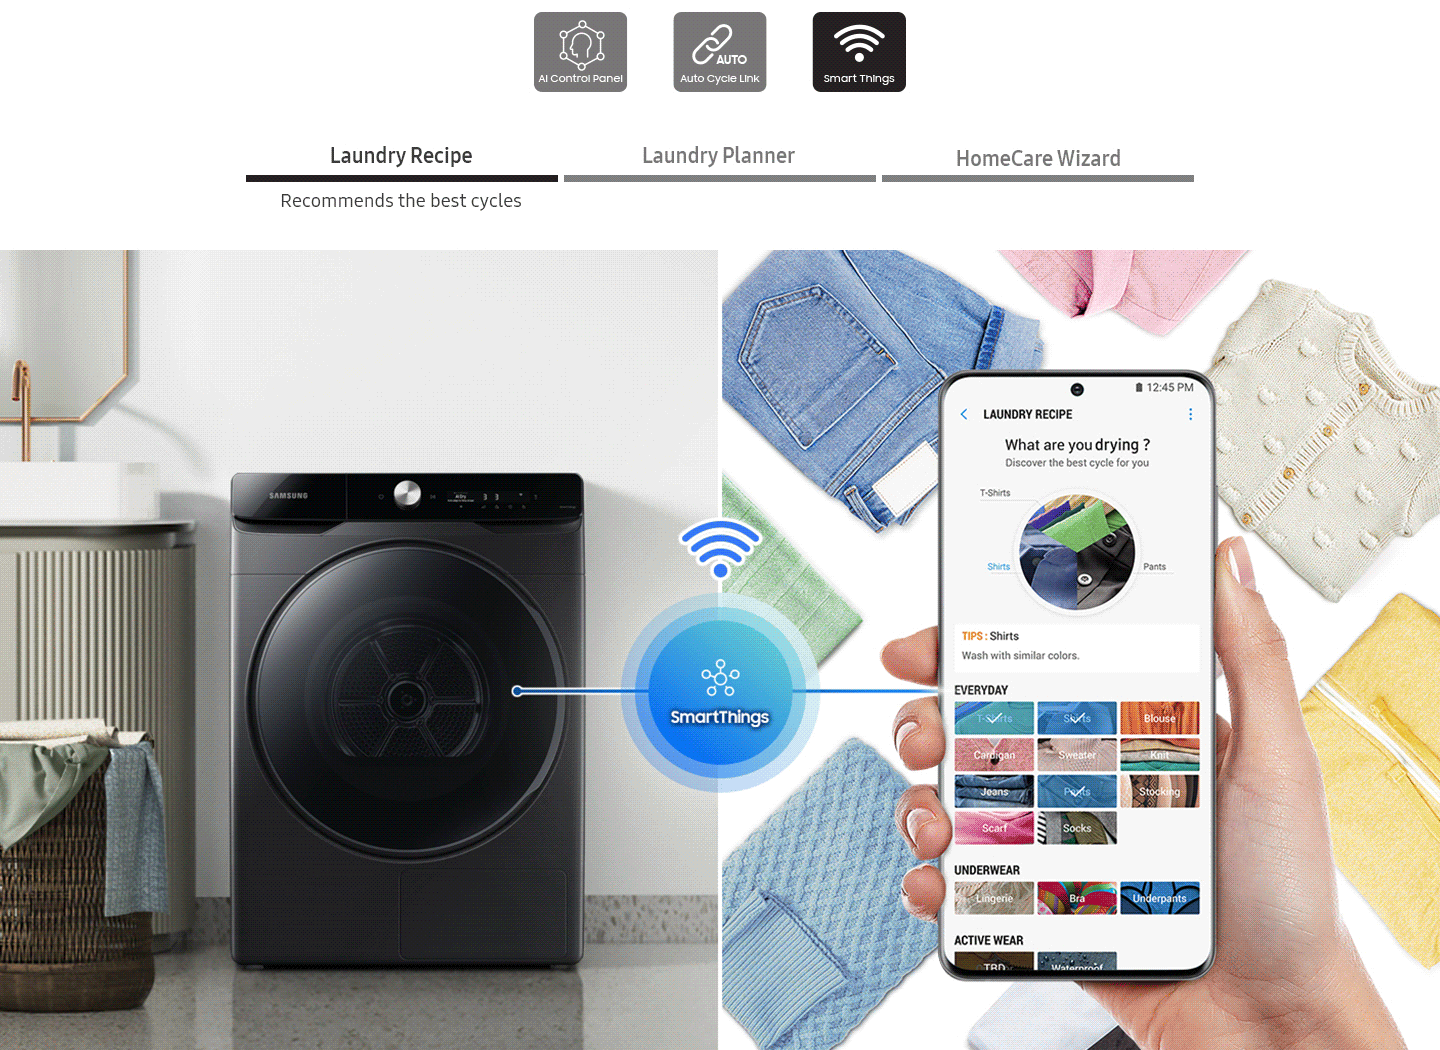 SmartThings and Laundry Recipe are selected. Recommends the best cycles. A white Bespoke Grande AI dryer is next to a hand holding a phone. Laundry Recipe is onscreen. Between is a SmartThings logo, a Wi-Fi symbol, and a line, which moves left. The scene shifts and Laundry Planner is selected. Curates your daily laundry plan. Laundry Planner is onscreen, letting users schedule laundry and recommending cycles. The scene shifts and HomeCare Wizard is selected. Self diagnosing and managing. HomeCare Wizard is onscreen, managing the dryer, offering weekly reports, and recommending optimal cycles.